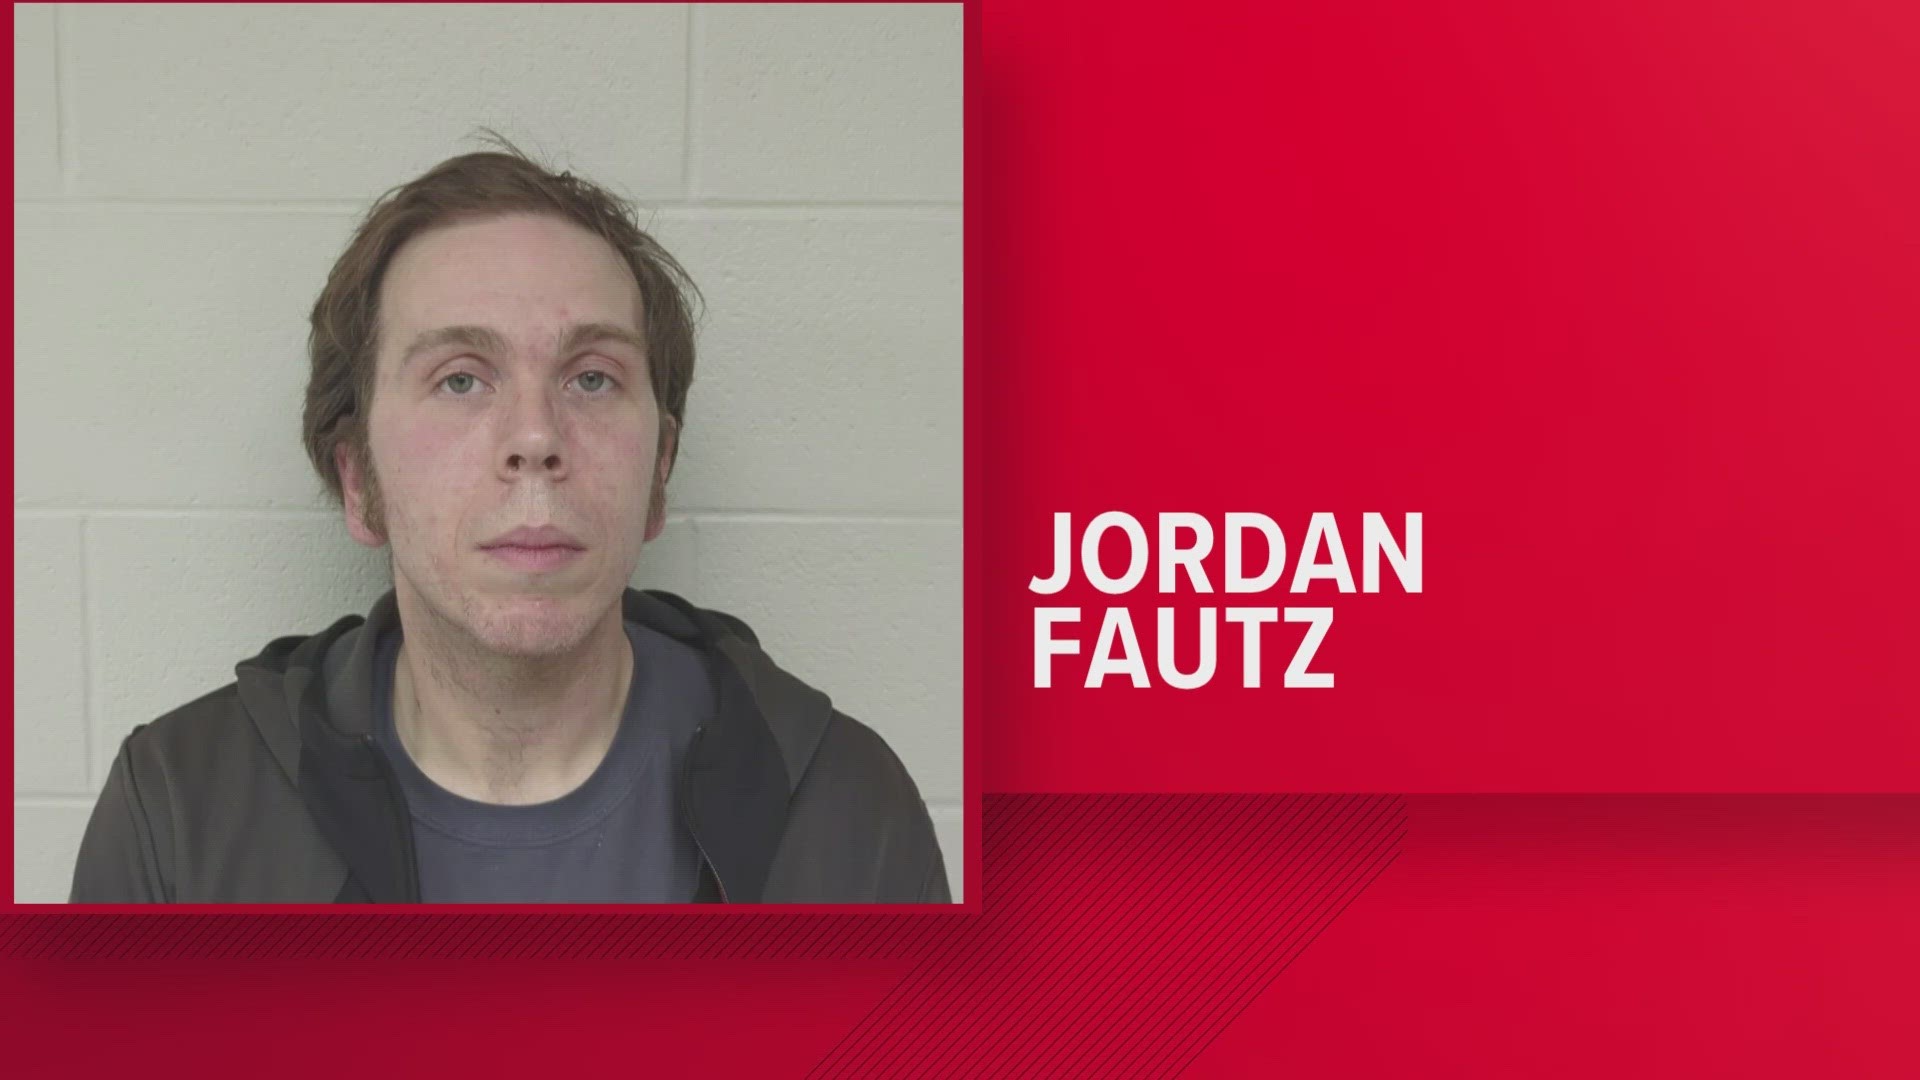 Investigators said 39-year-old Jordan Fautz was working at St. Stephen Martyr Catholic School when he allegedly sent the materials to an undercover officer.